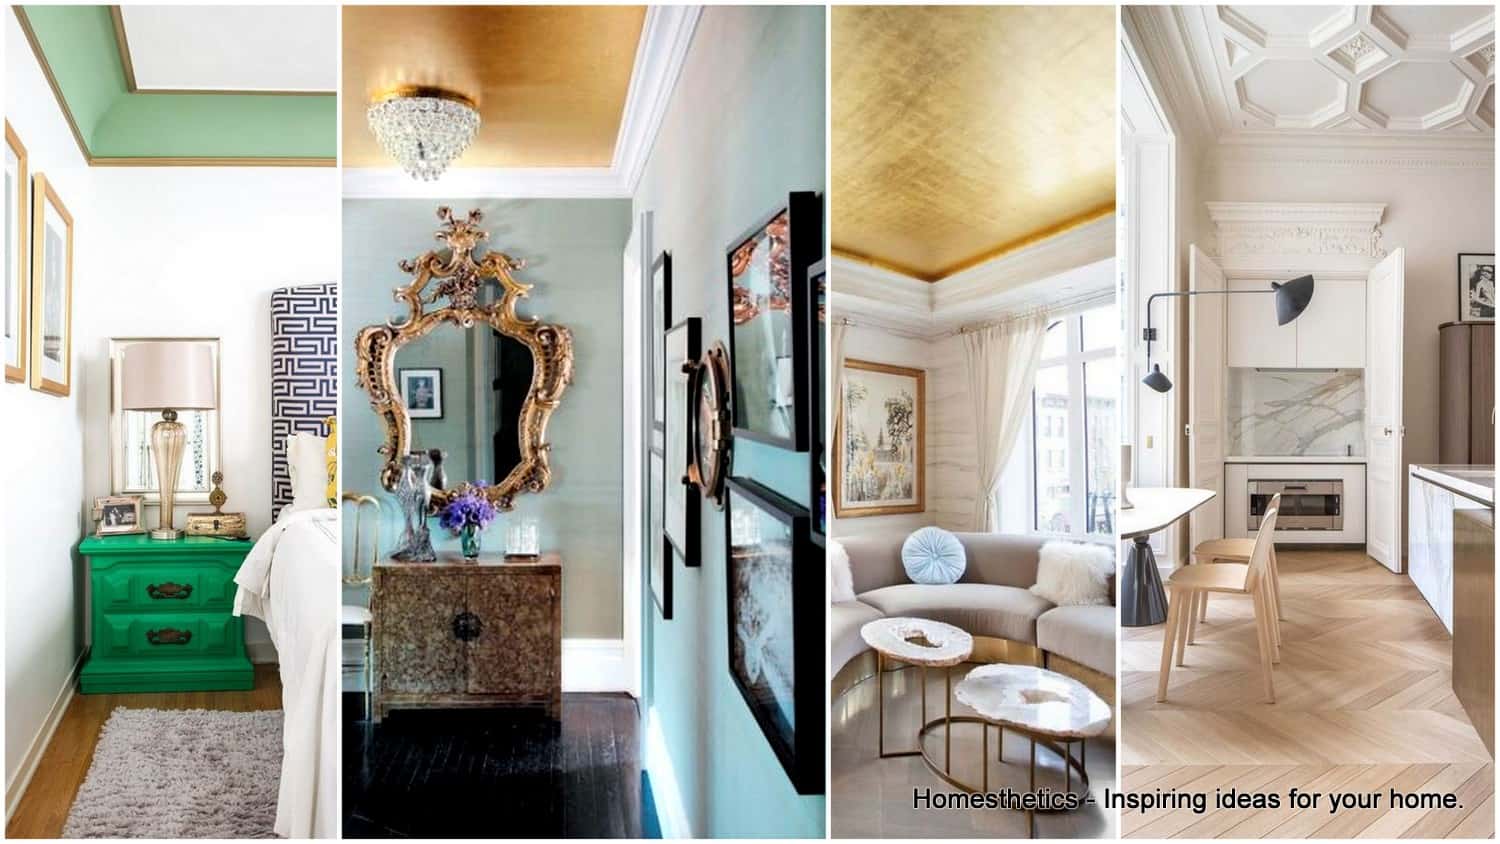 Learn How to Used Coved Ceilings to Emphasize Your Home Decor